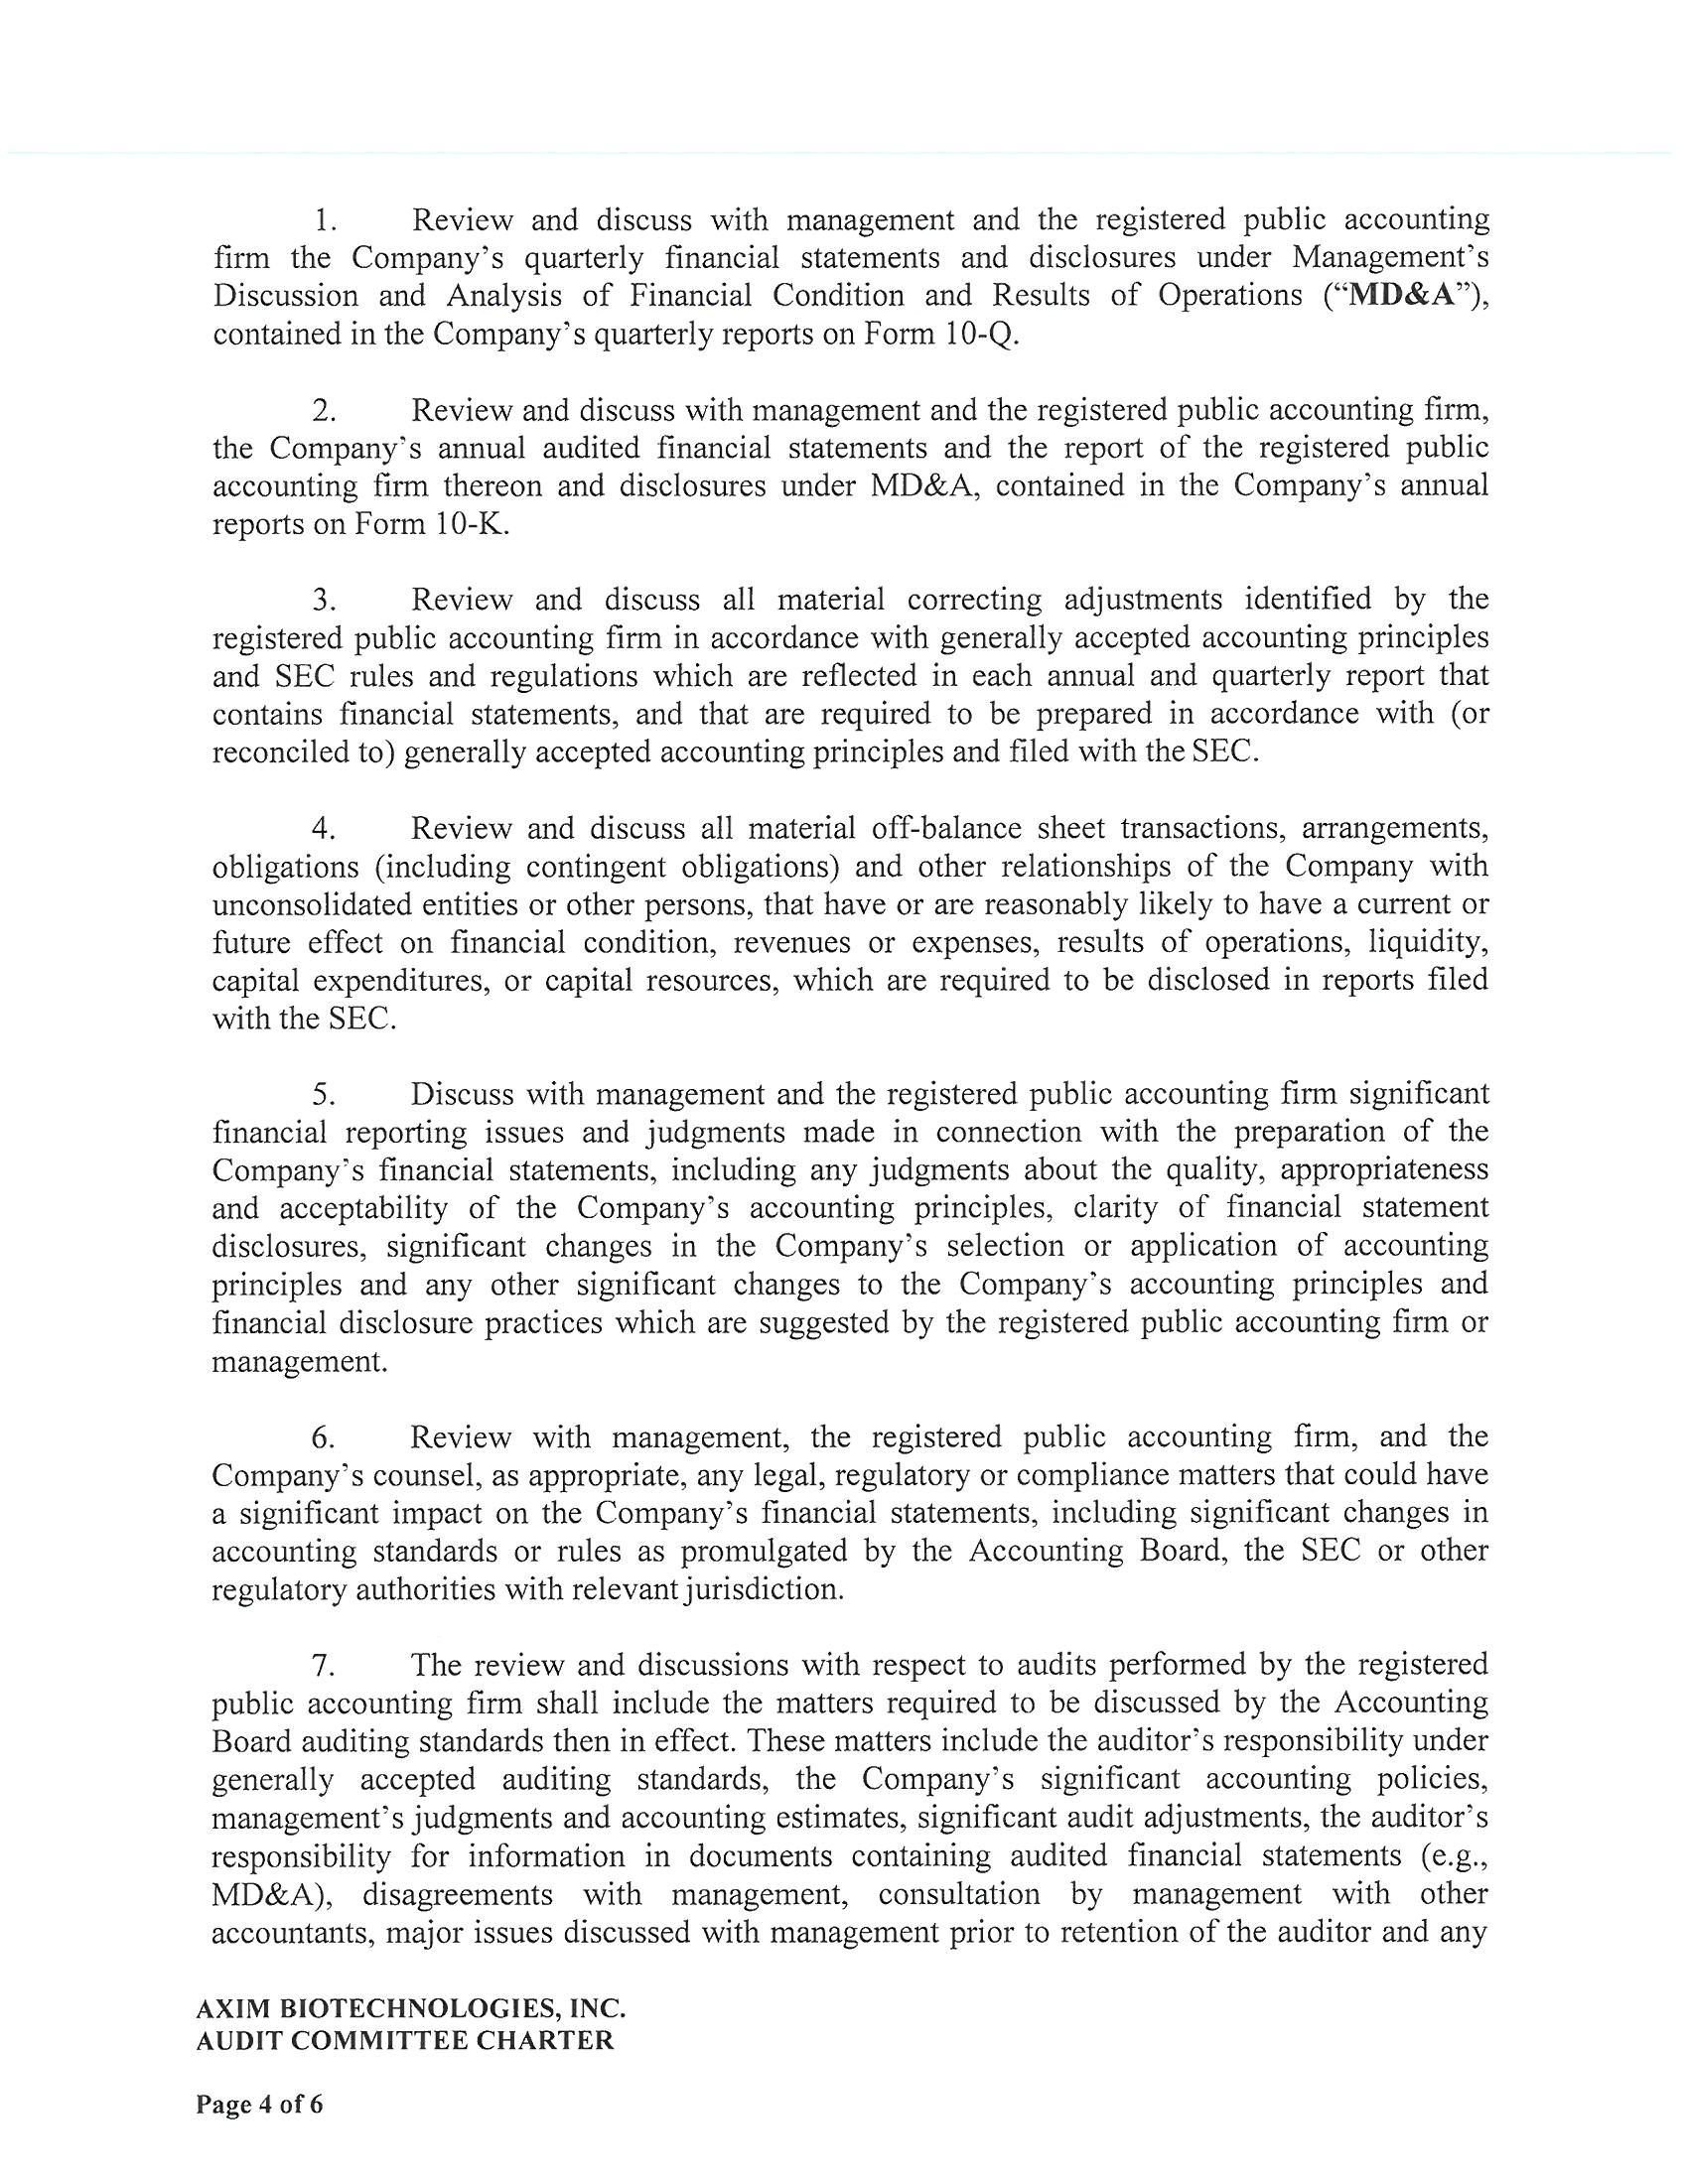 99.3 Audit Committee Charter_Page_4.jpg